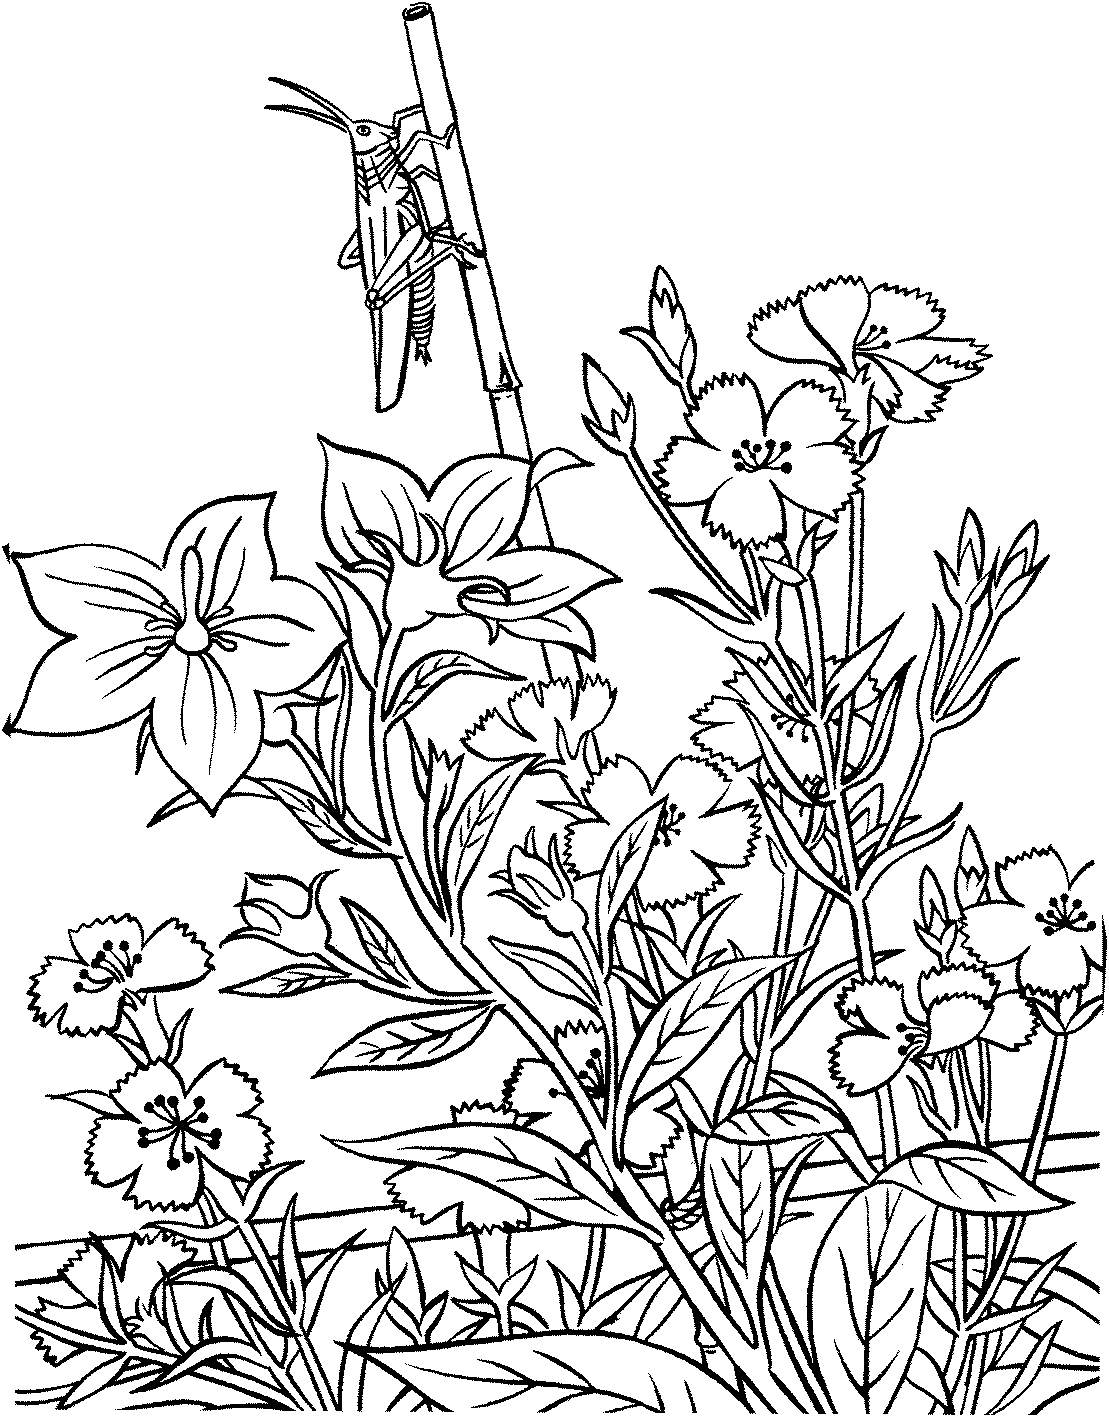 gardening colouring pages gardening coloring pages to download and print for free colouring gardening pages 